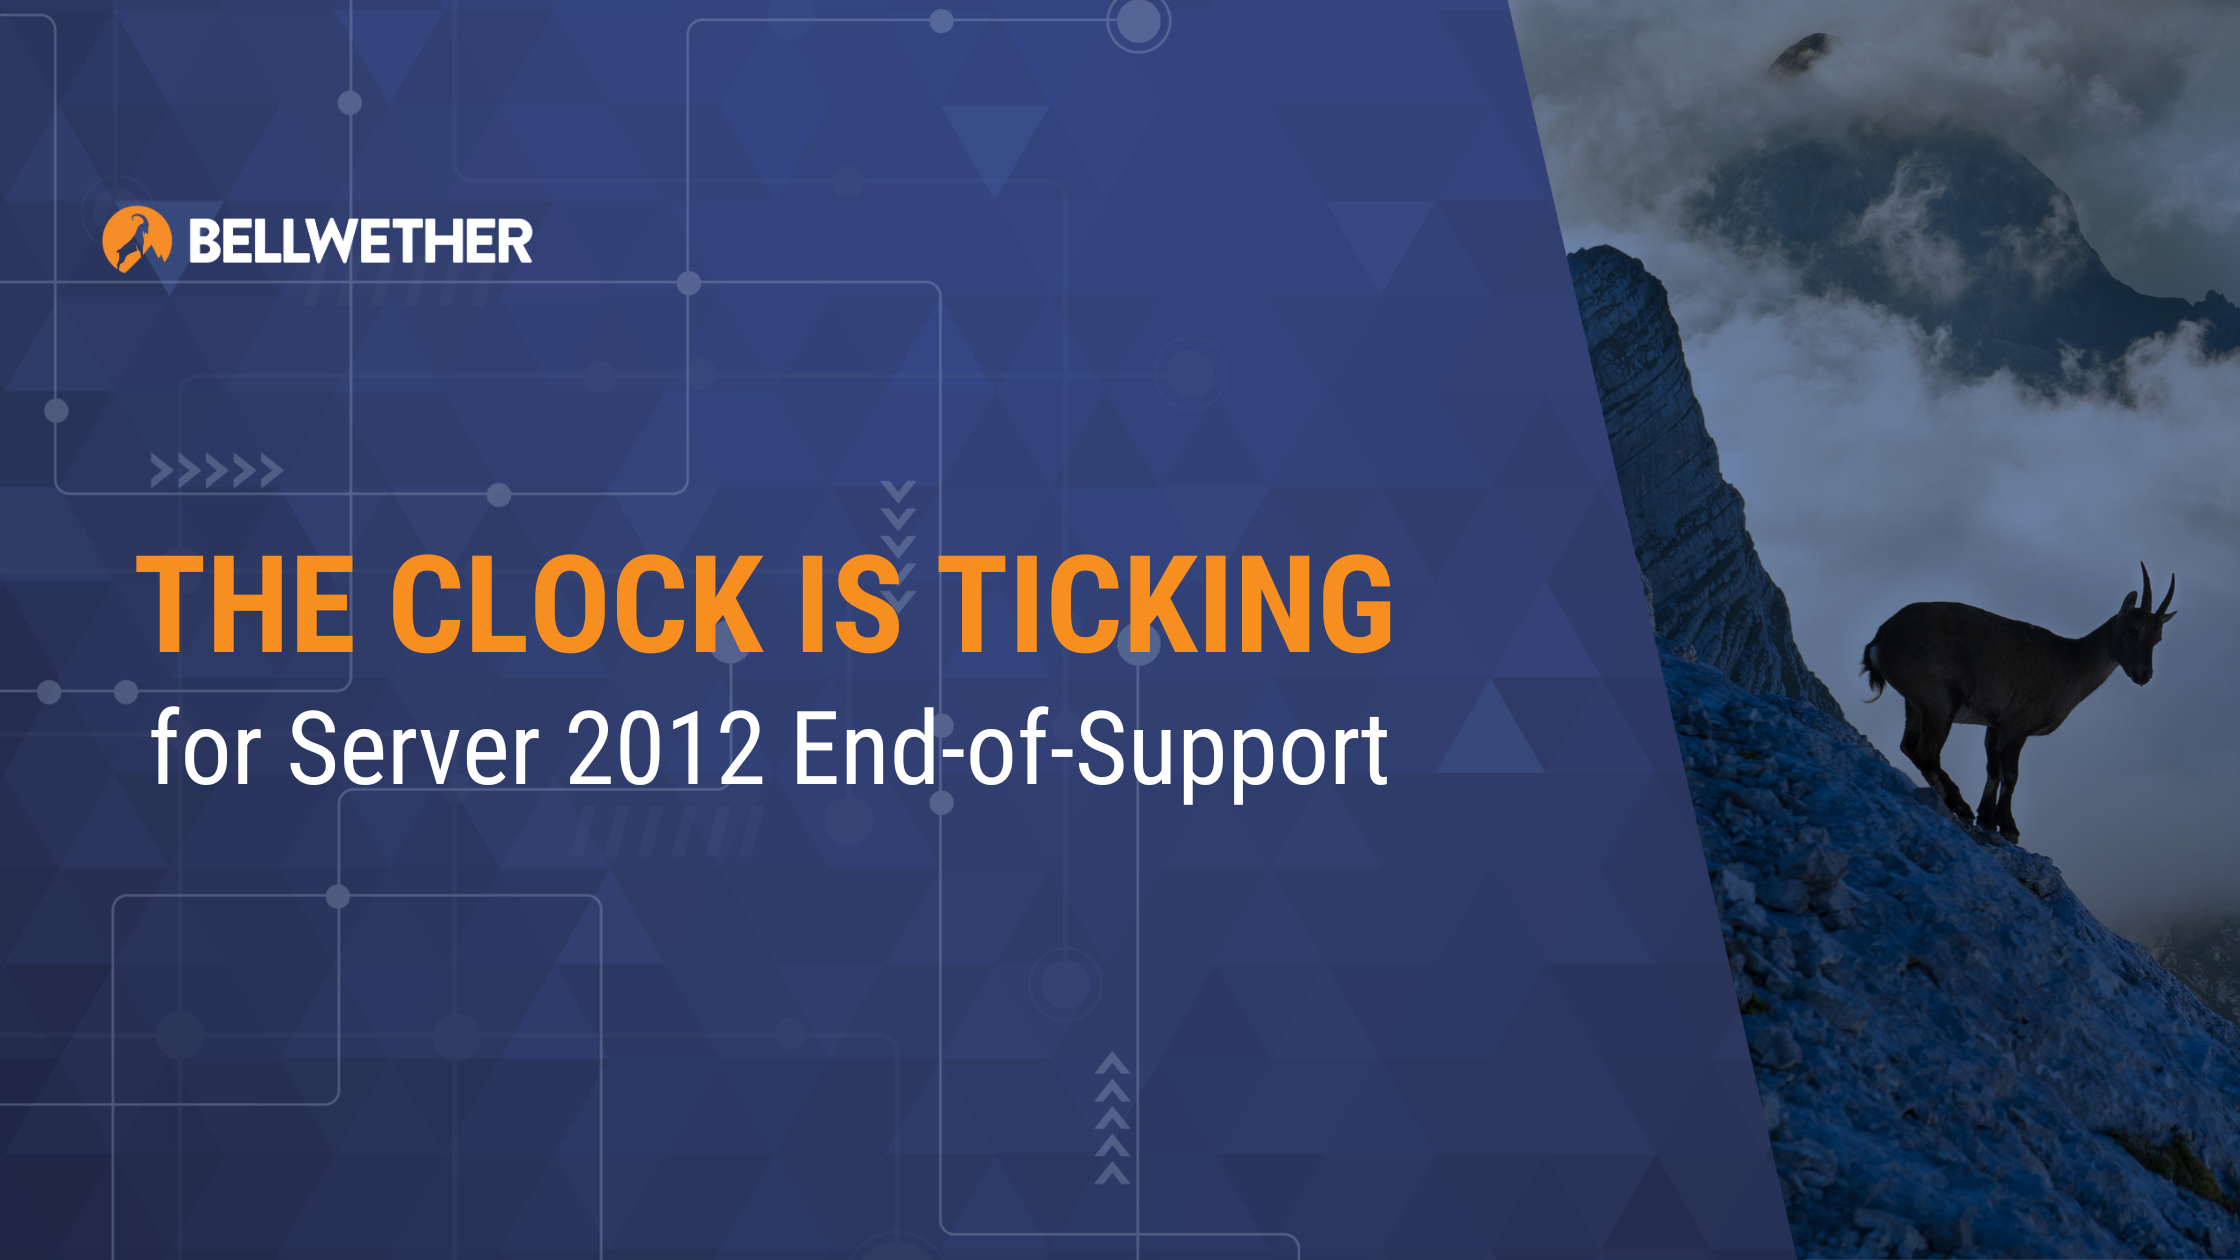 The clock is ticking for Server 2012 End-of-support